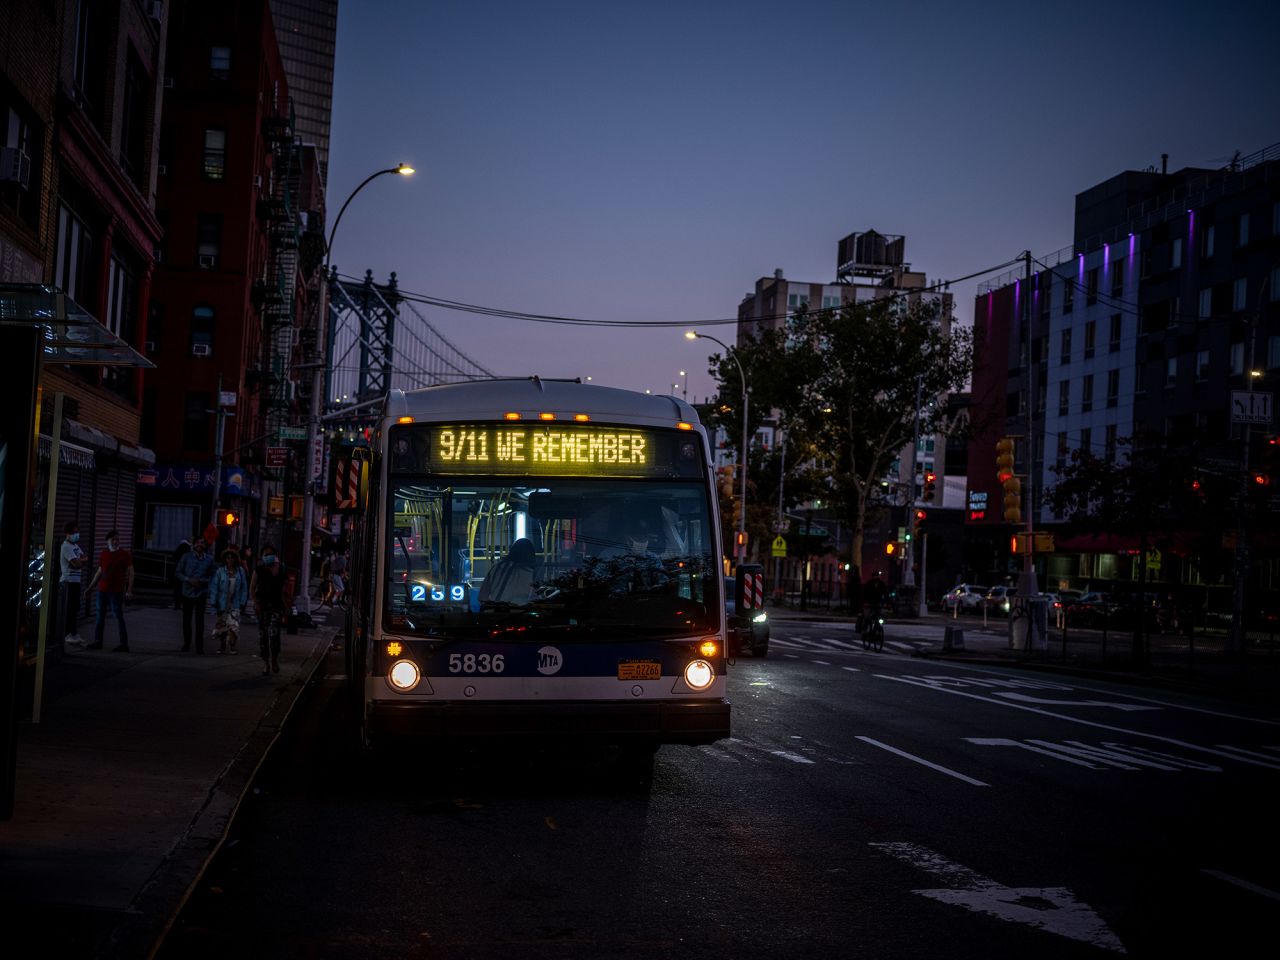 A bus makes its way through New York's Chinatown. The destination sign was changed to read "9/11 We Remember."